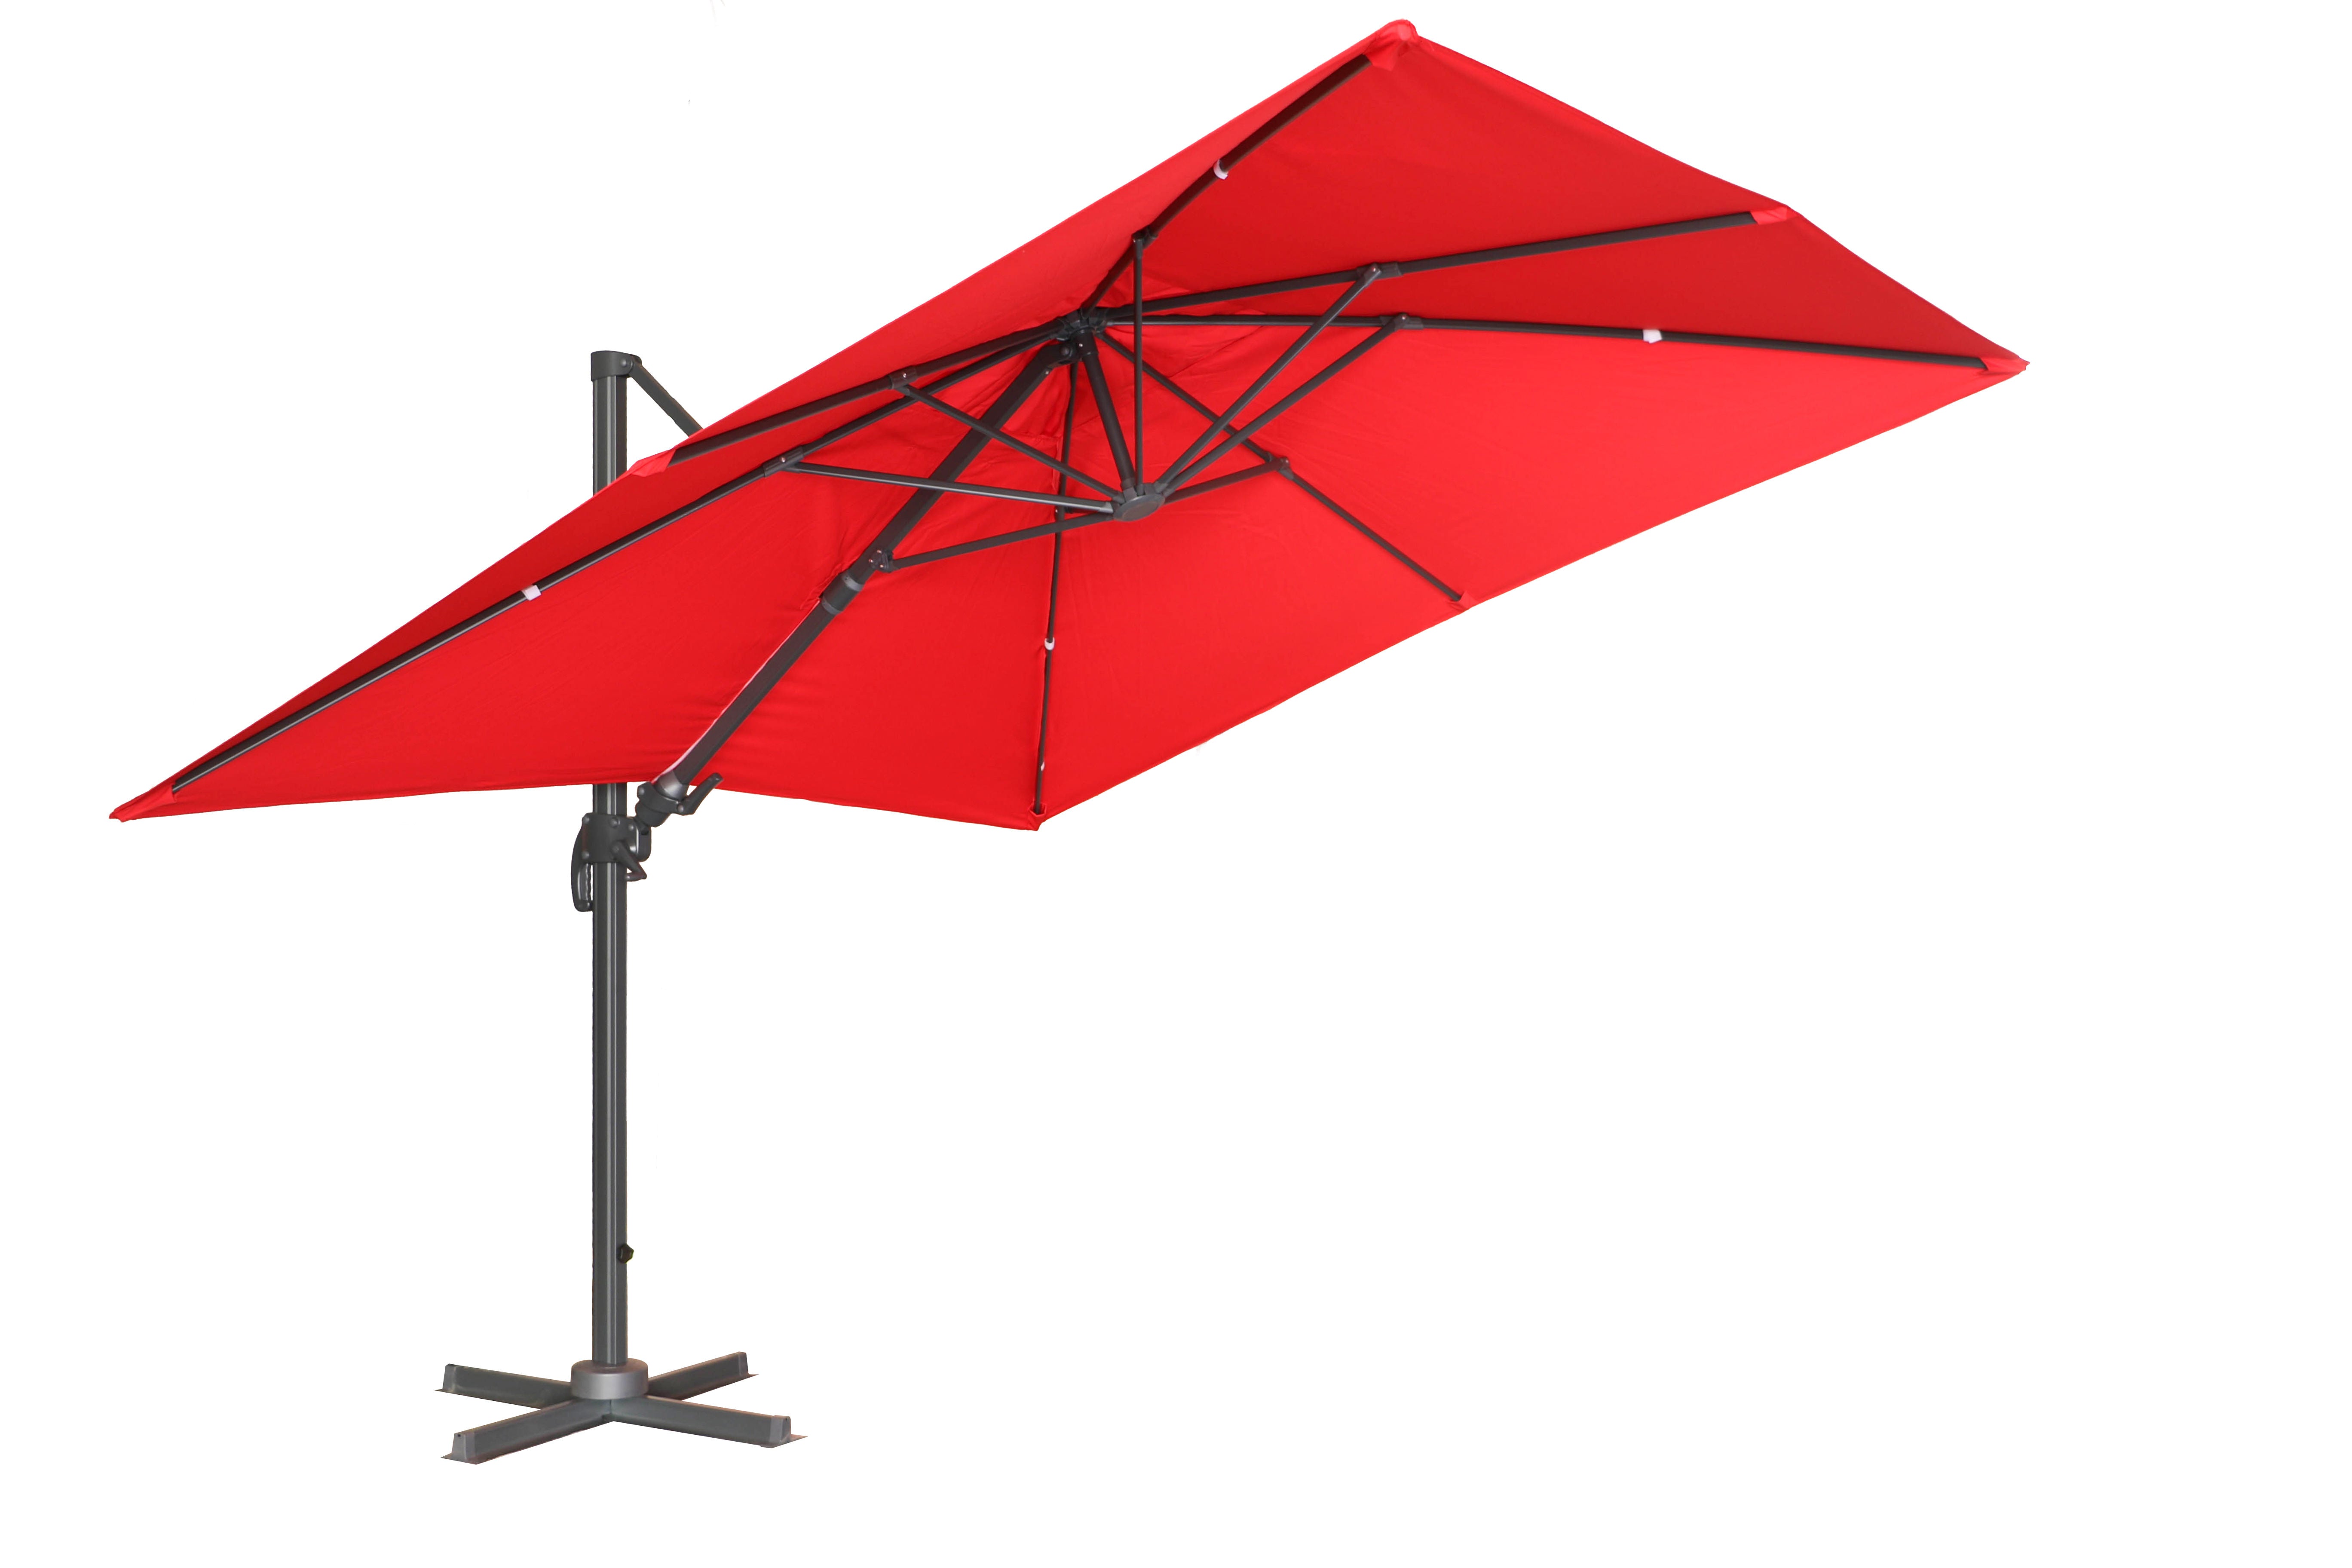 PatioZone 11' Tilting Rotating Luxury Offset Umbrella (Cover Incl.) in UV-Protected Polyester (MOSS-T1203R) - Red